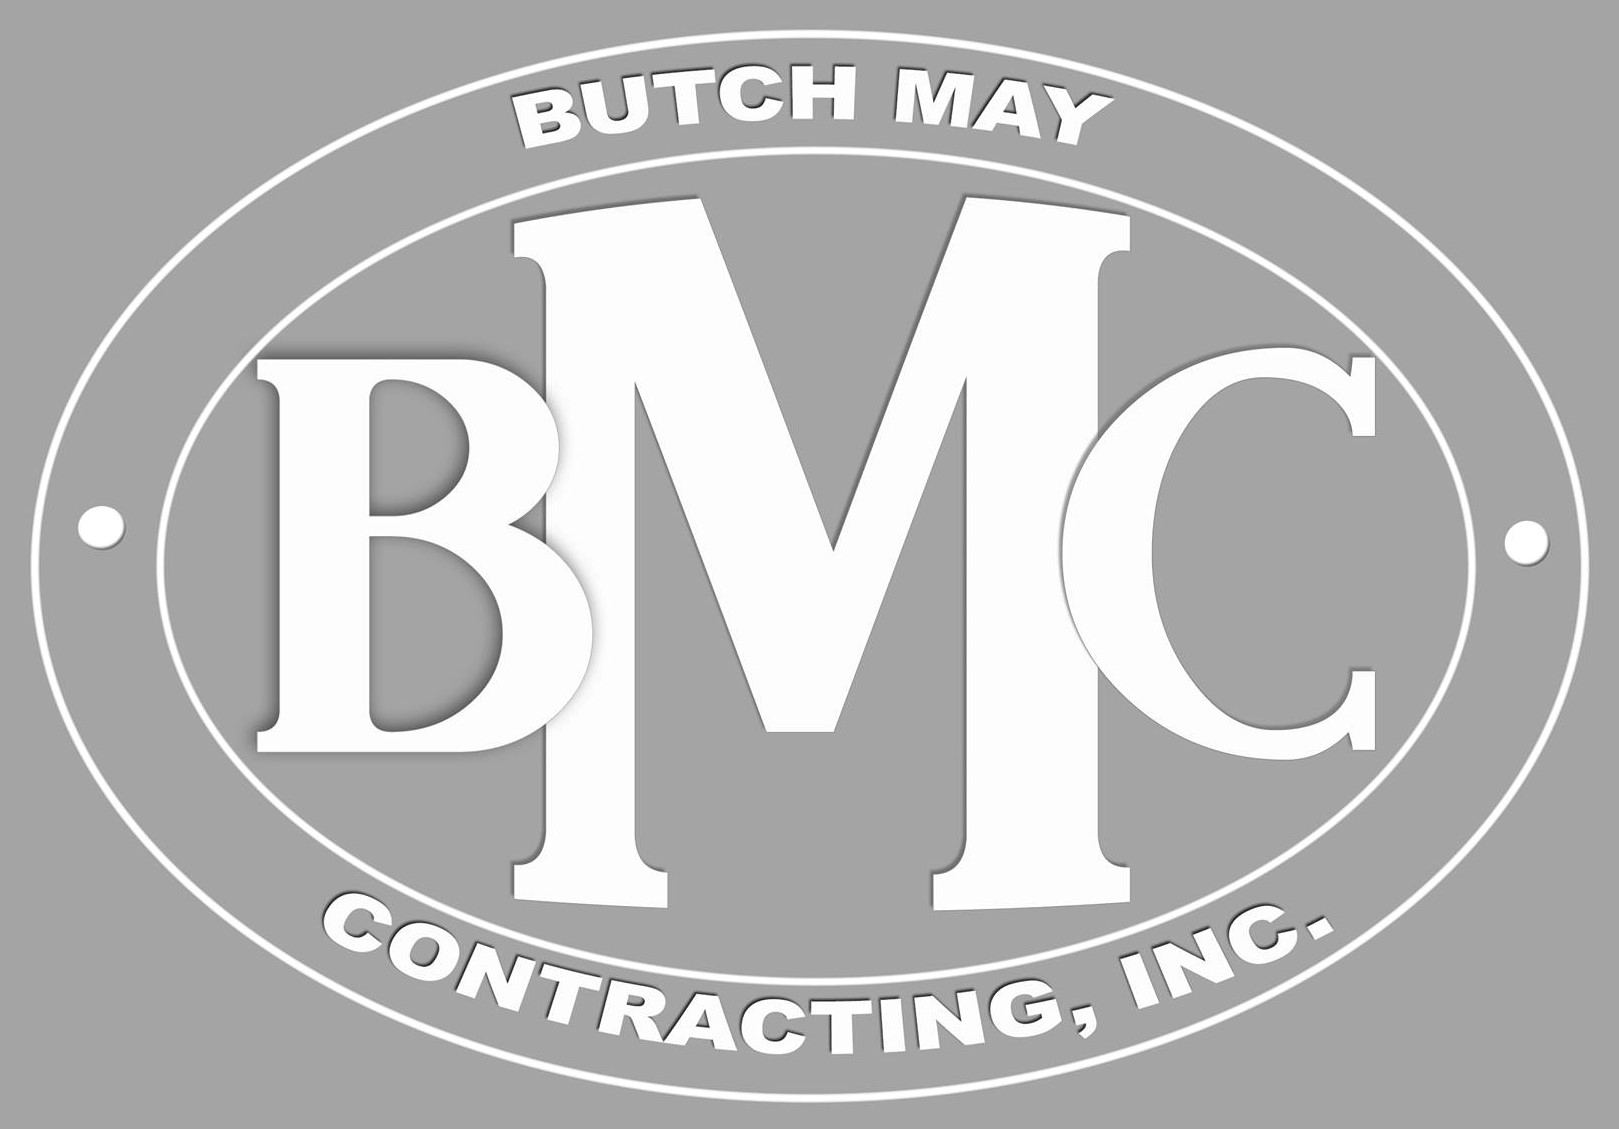 Butch May Contracting Inc.